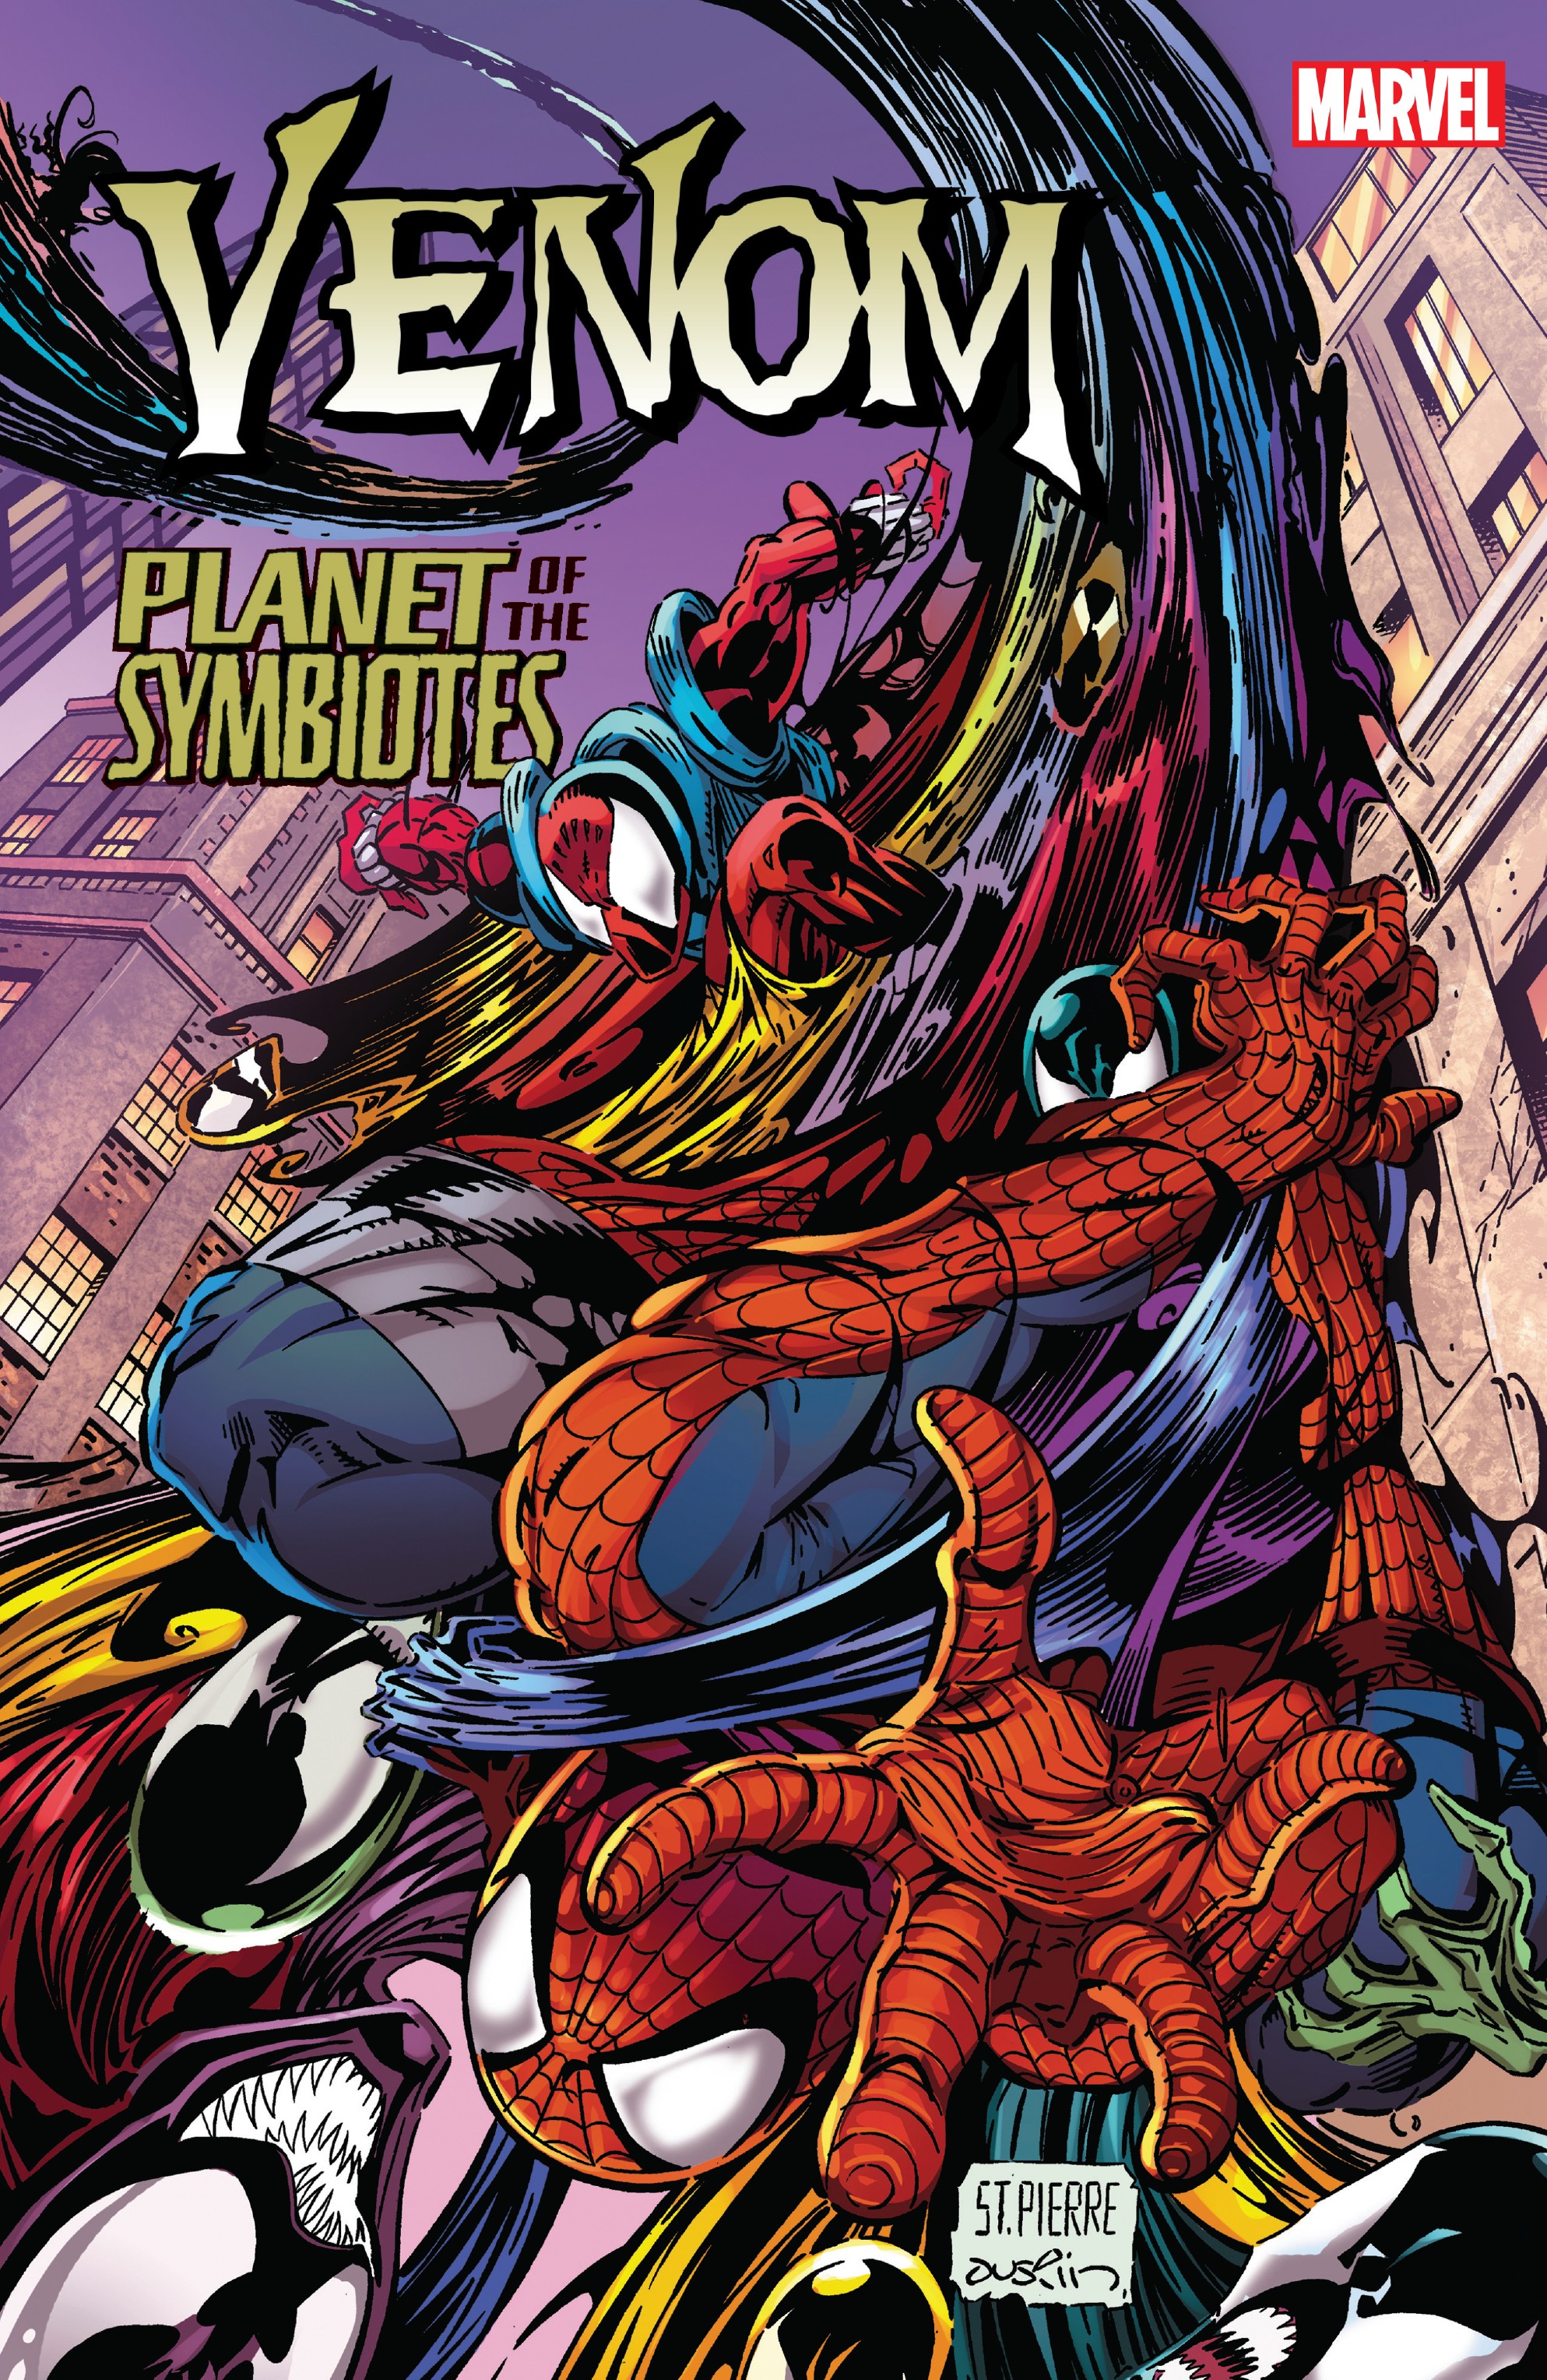 Read online Venom: Planet of the Symbiotes comic -  Issue # TPB - 1